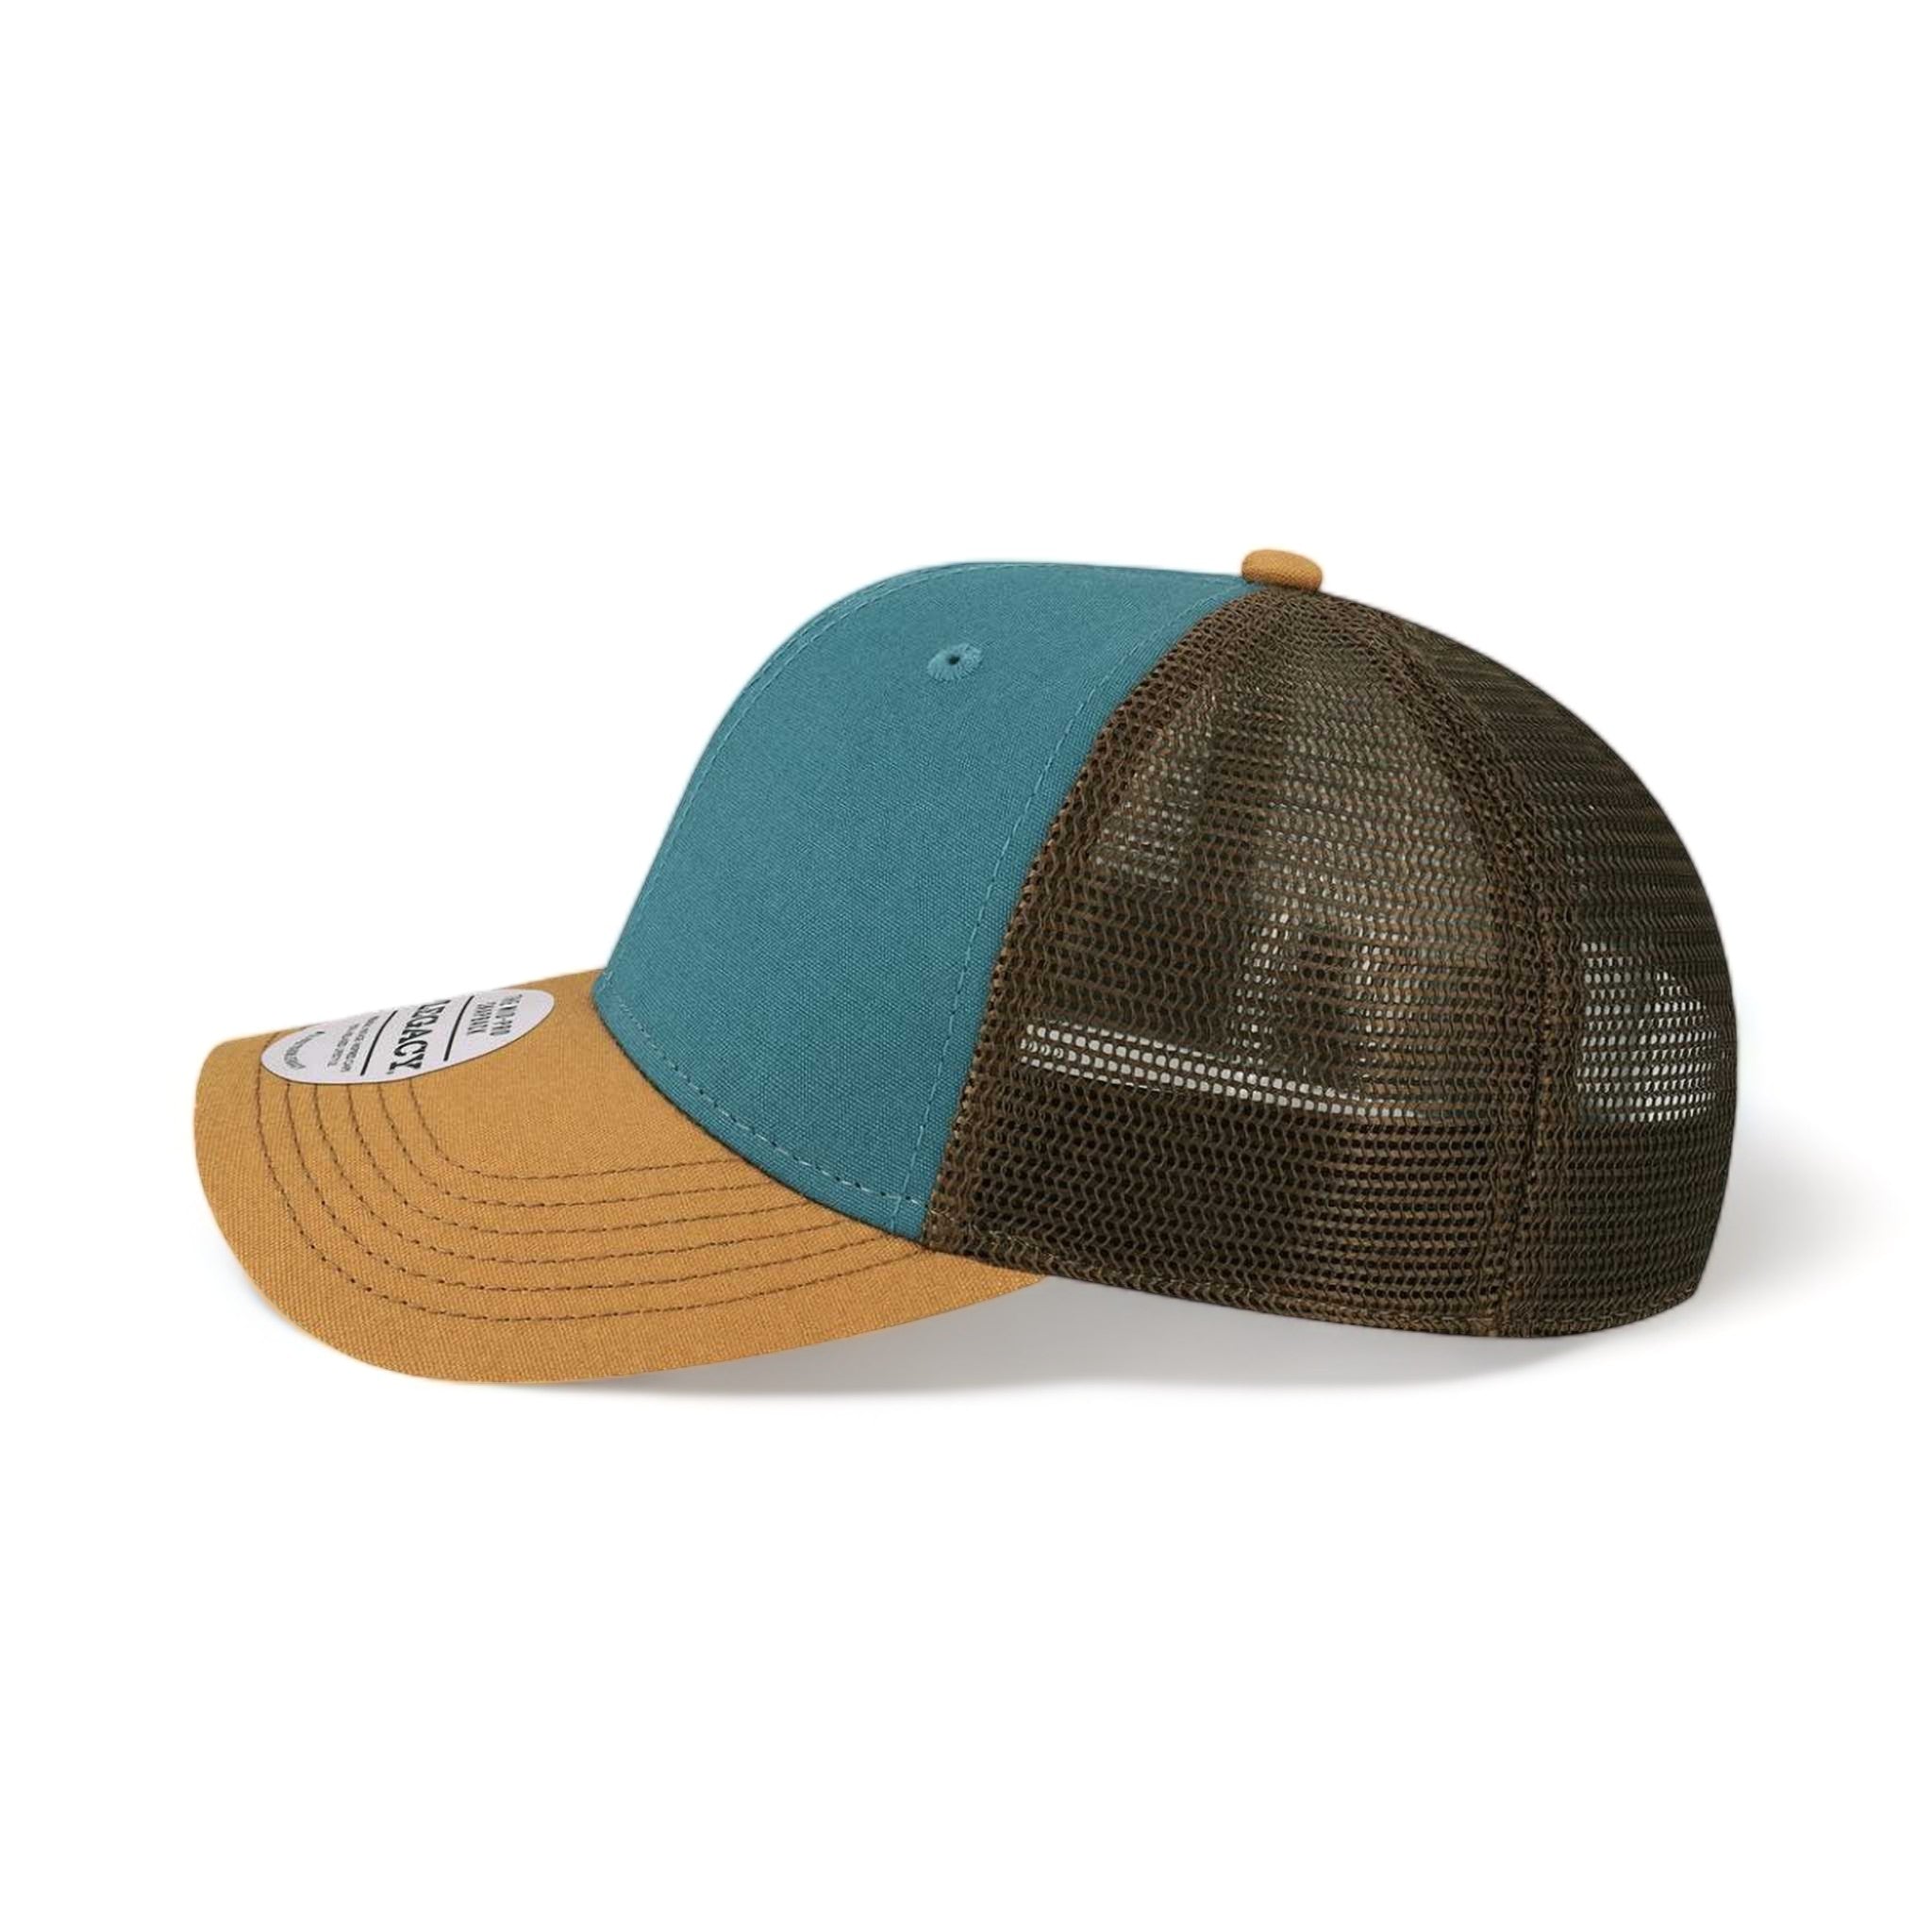 Side view of LEGACY MPS custom hat in marine, camel and brown